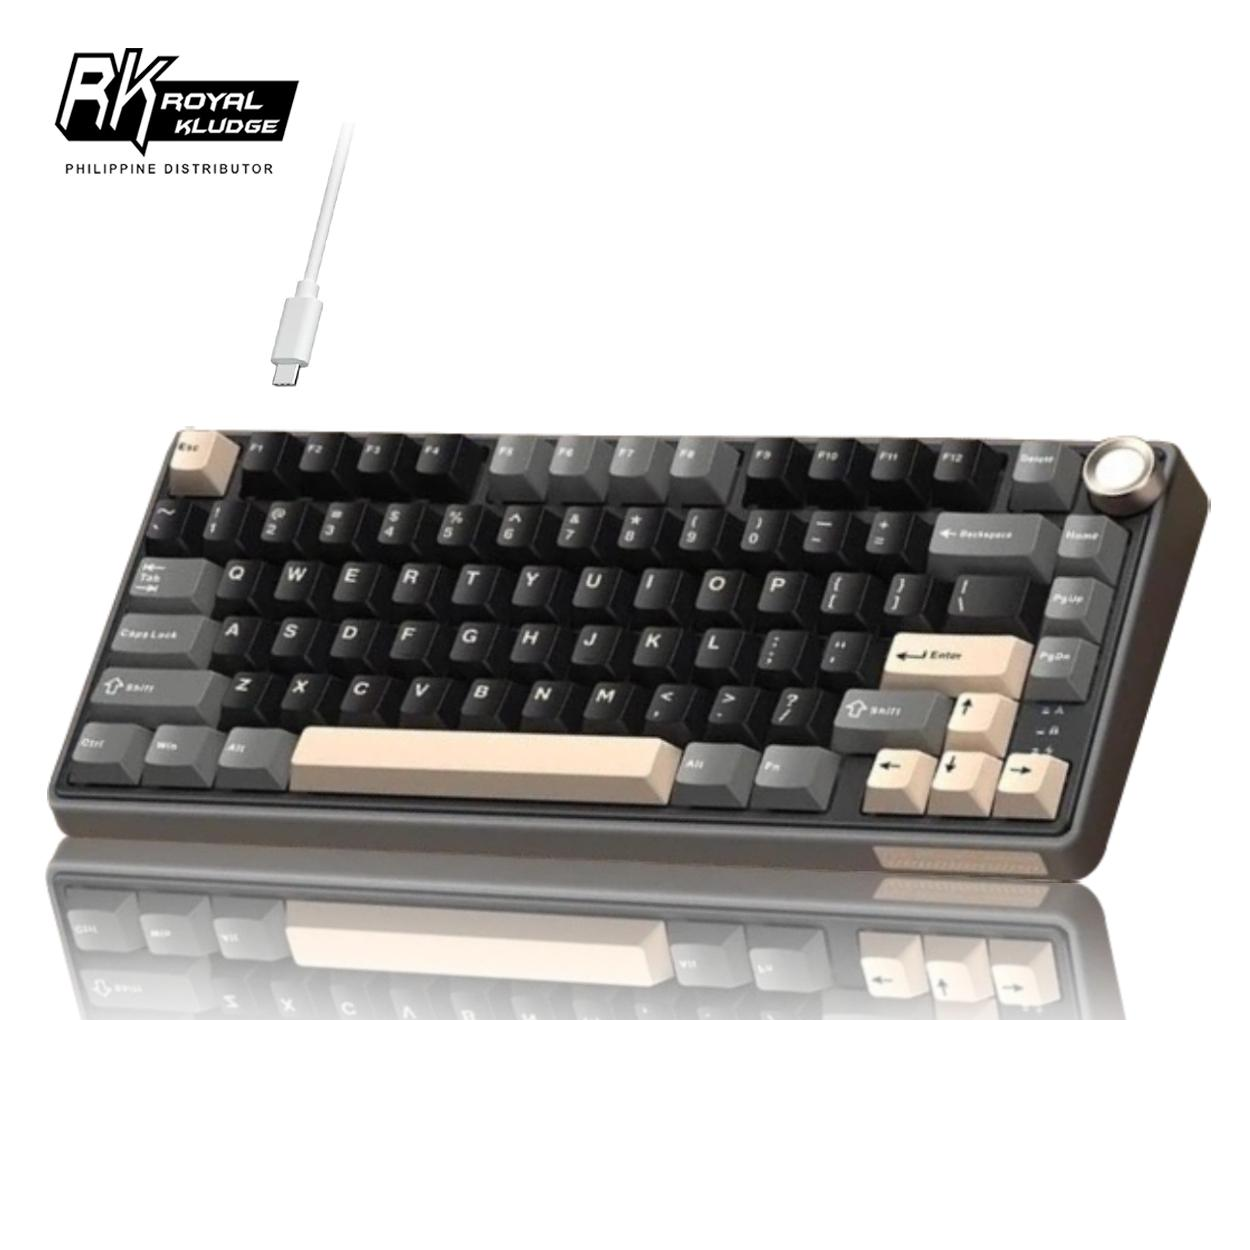 NEW Royal Kludge RK R75 Mechanical Keyboard Wired with Volume Knob 75% TKL Custom Gaming Keyboard Gasket Mount RGB Backlit with Software PBT Keycaps Hot Swappable